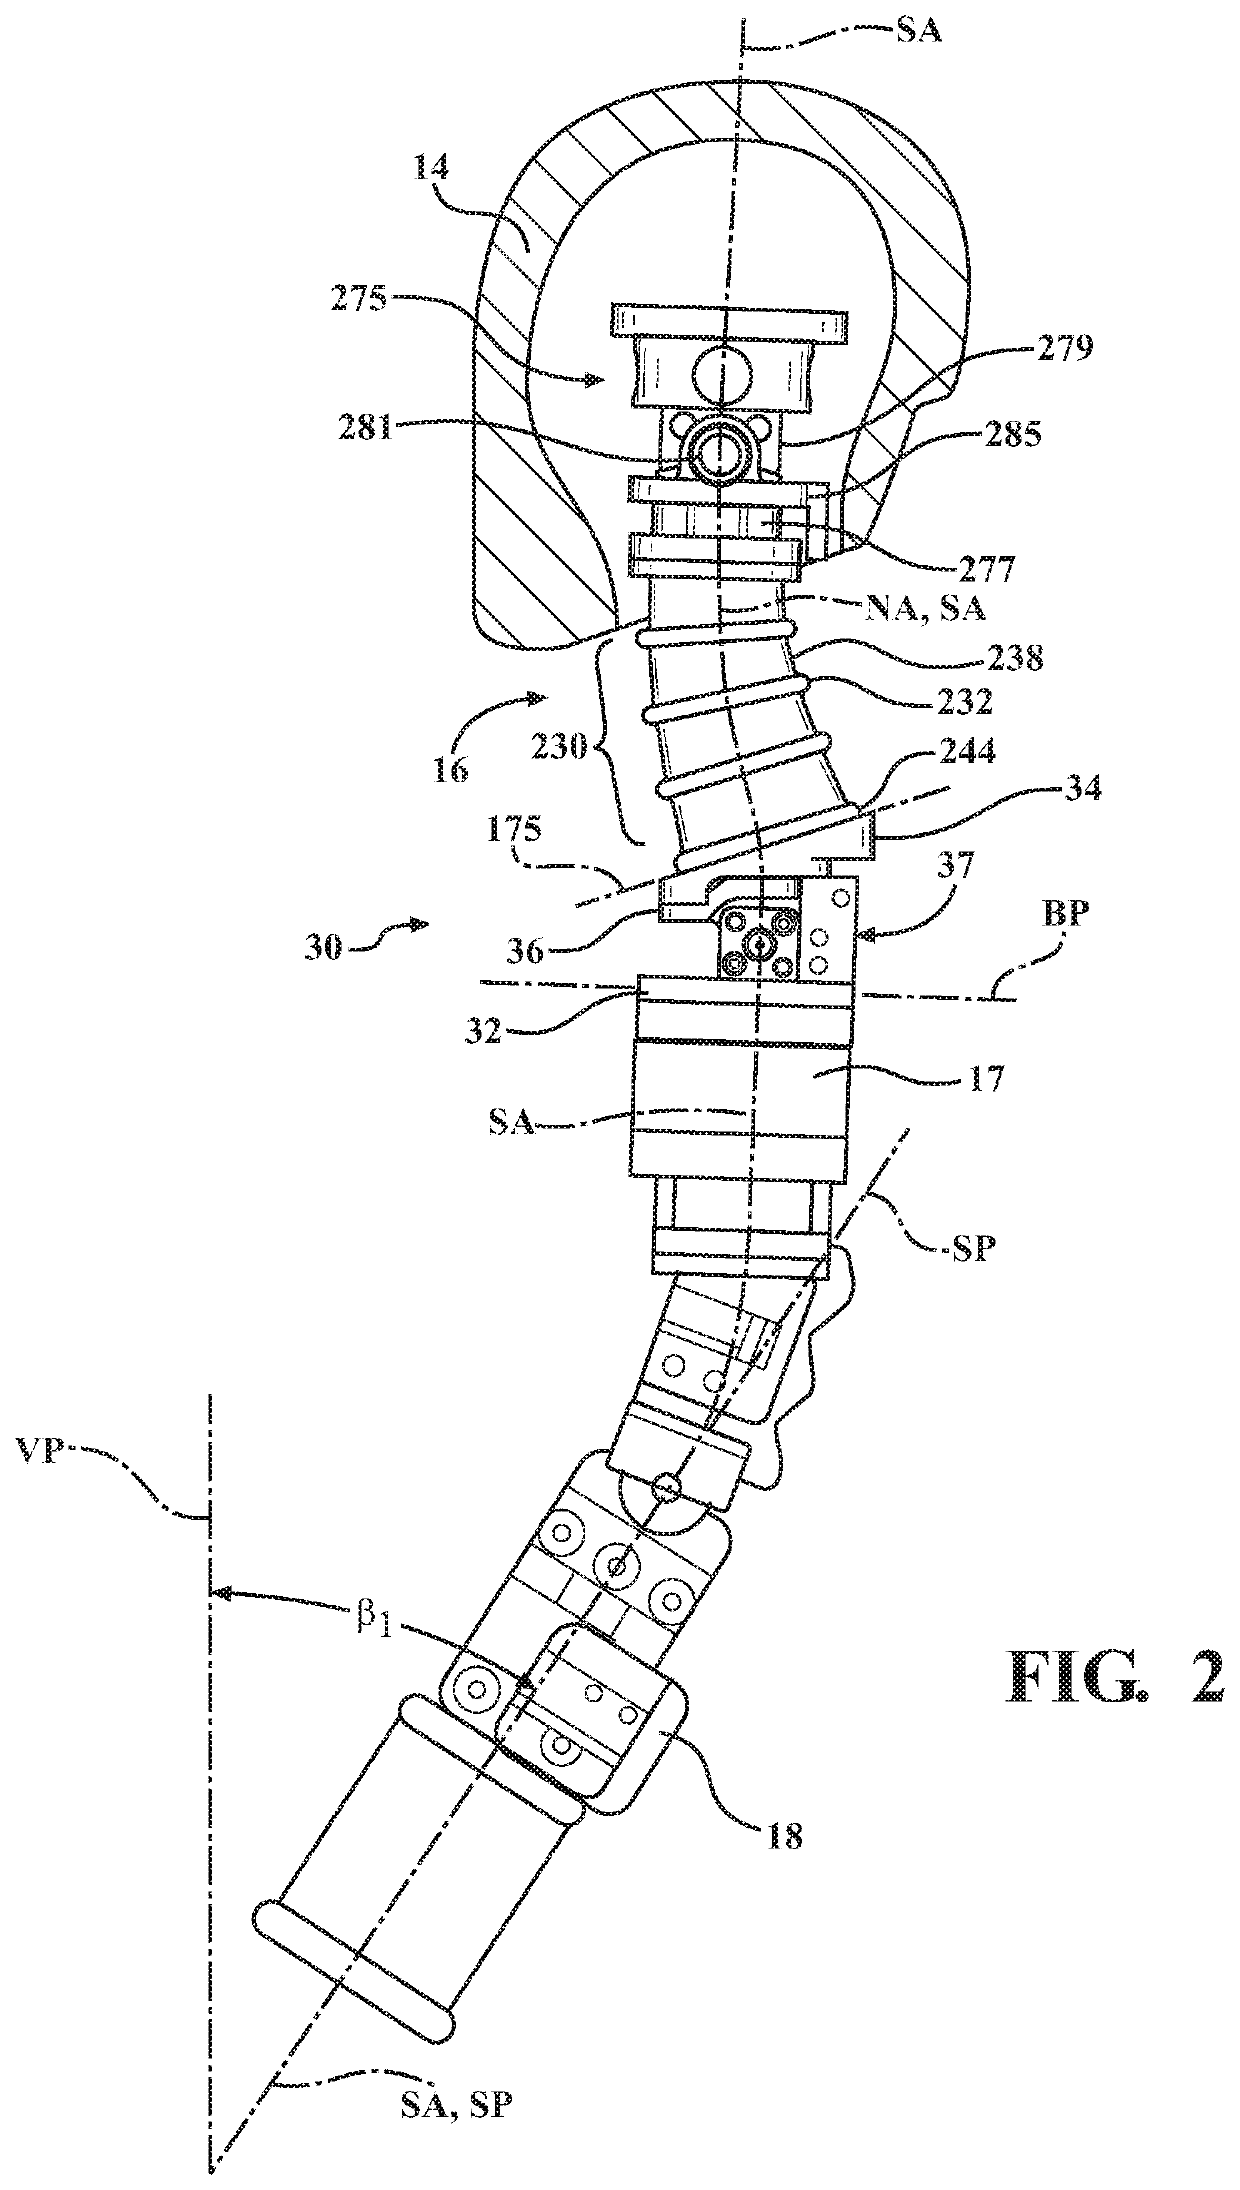 Neck Bracket Design For Anthropomorphic Test Device In Multiple Reclined Seating Postures